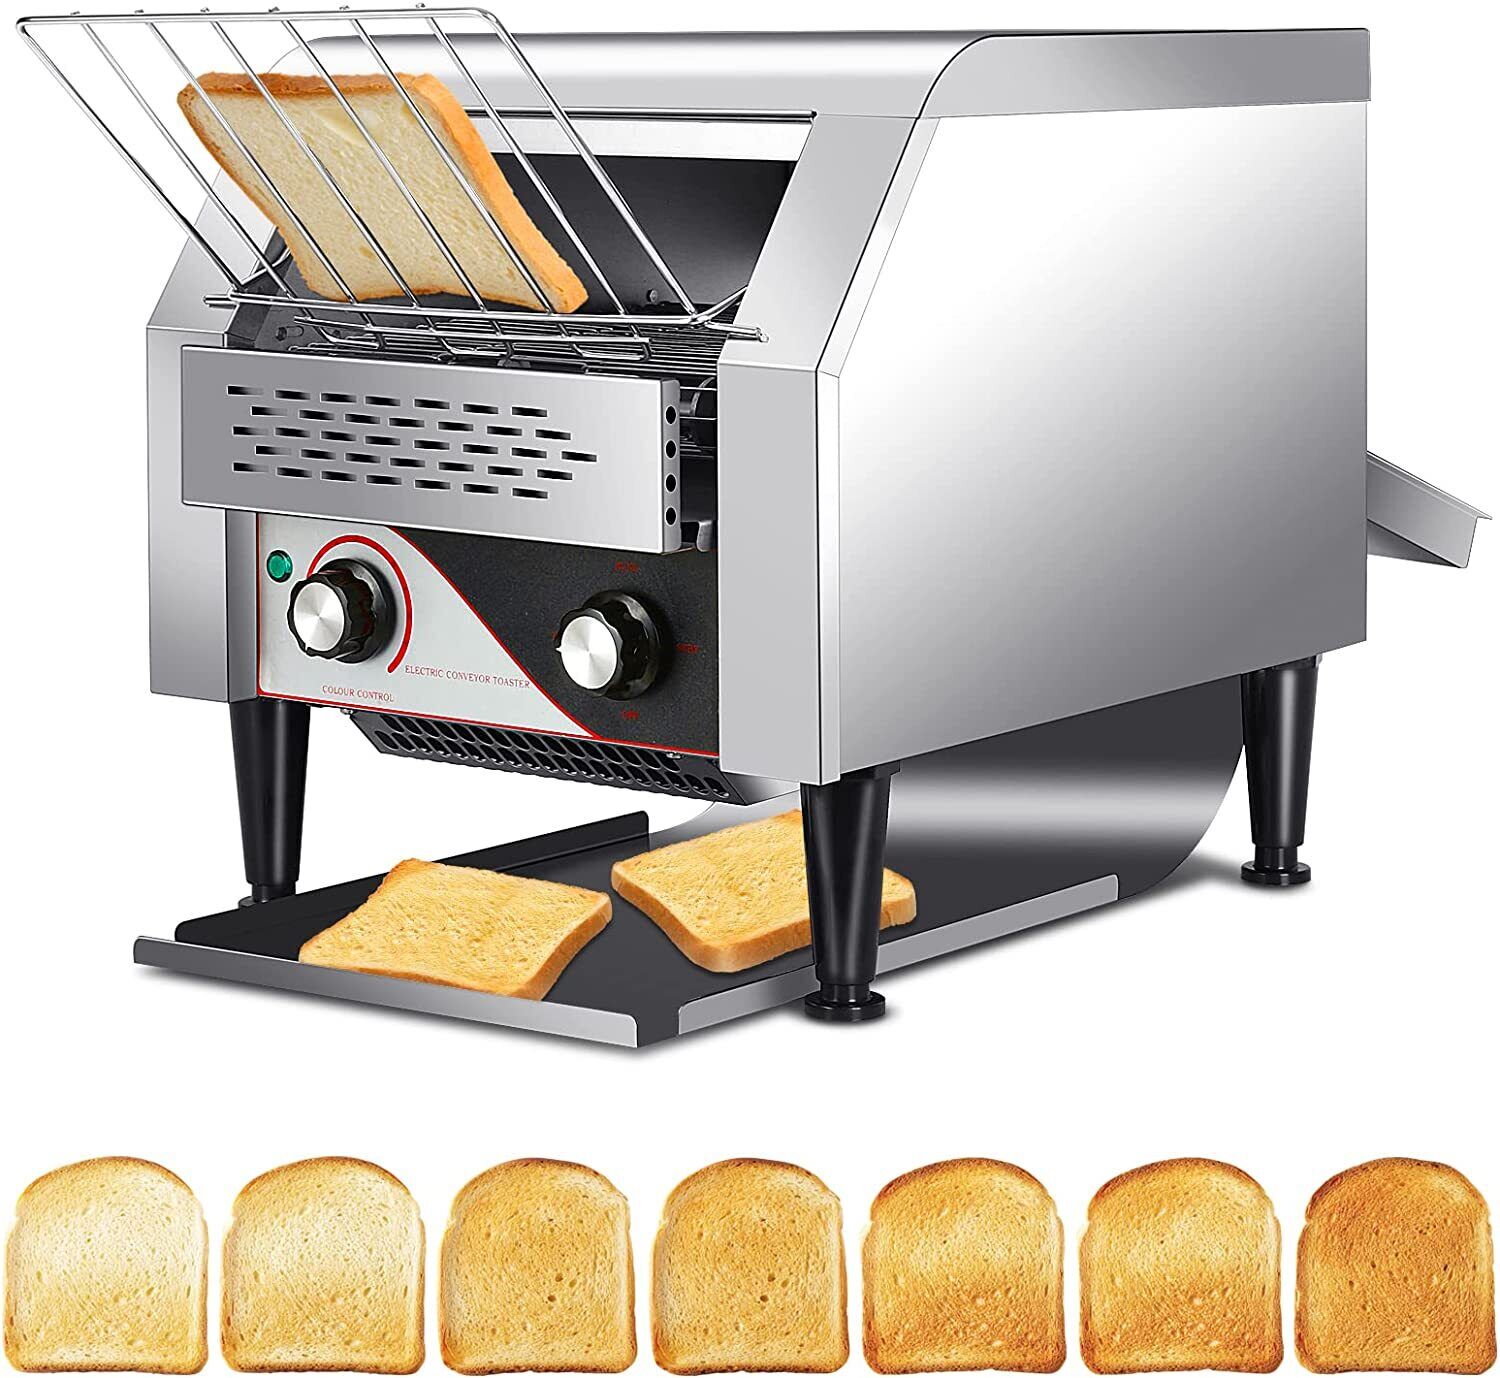 1.9kw Commercial Conveyor Toaster 300pcs/h Stainless Steel Restaurant Equipment